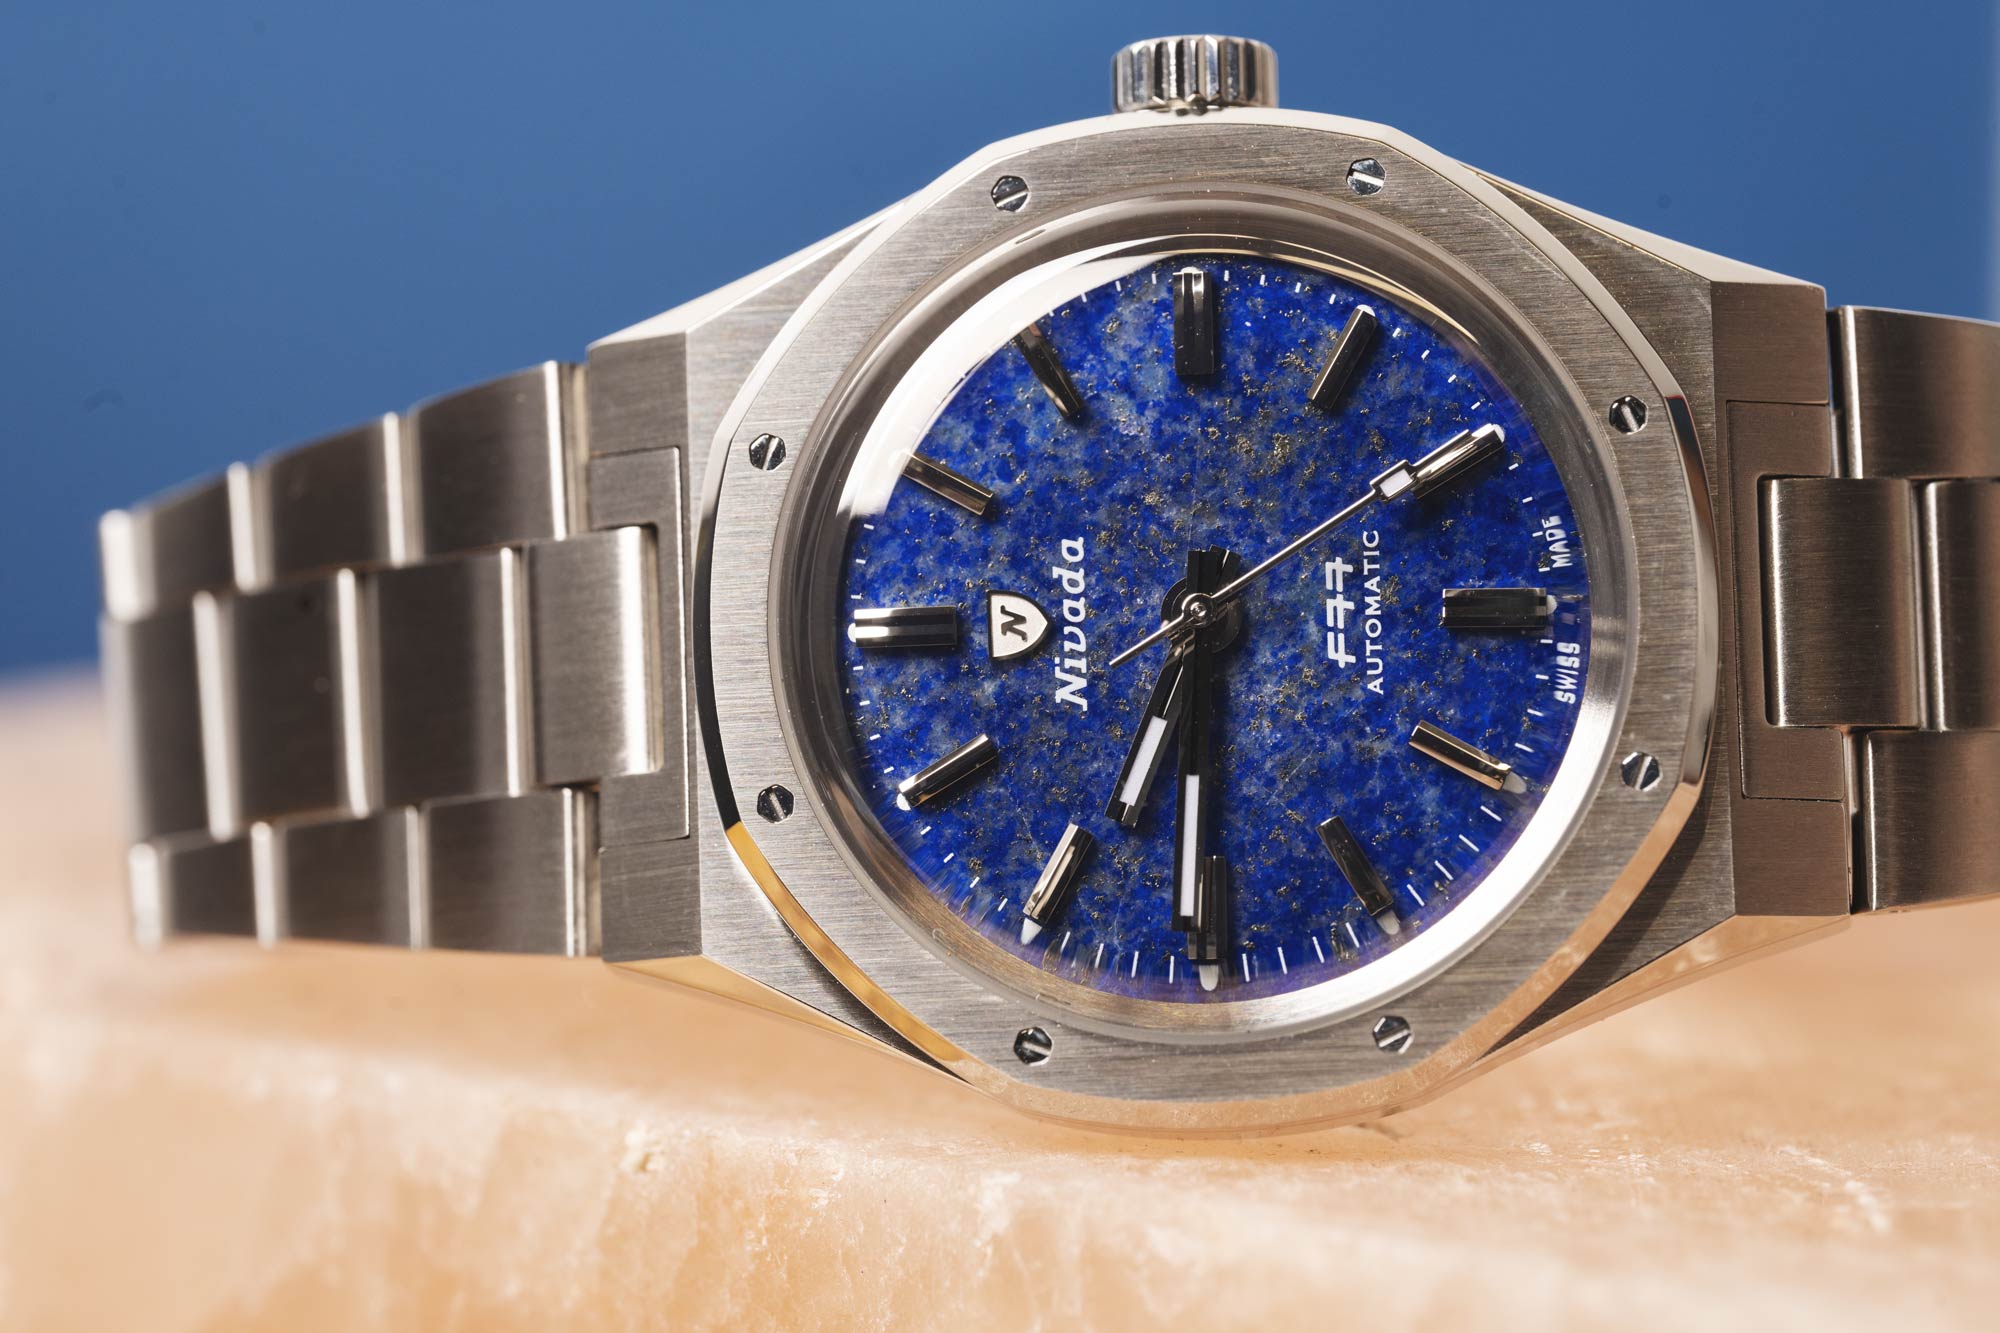 Slipping On The Double-Denim Patek Philippe Duo  World Time Date 5330G And Nautilus Self-Winding Chronograph 5980/60G